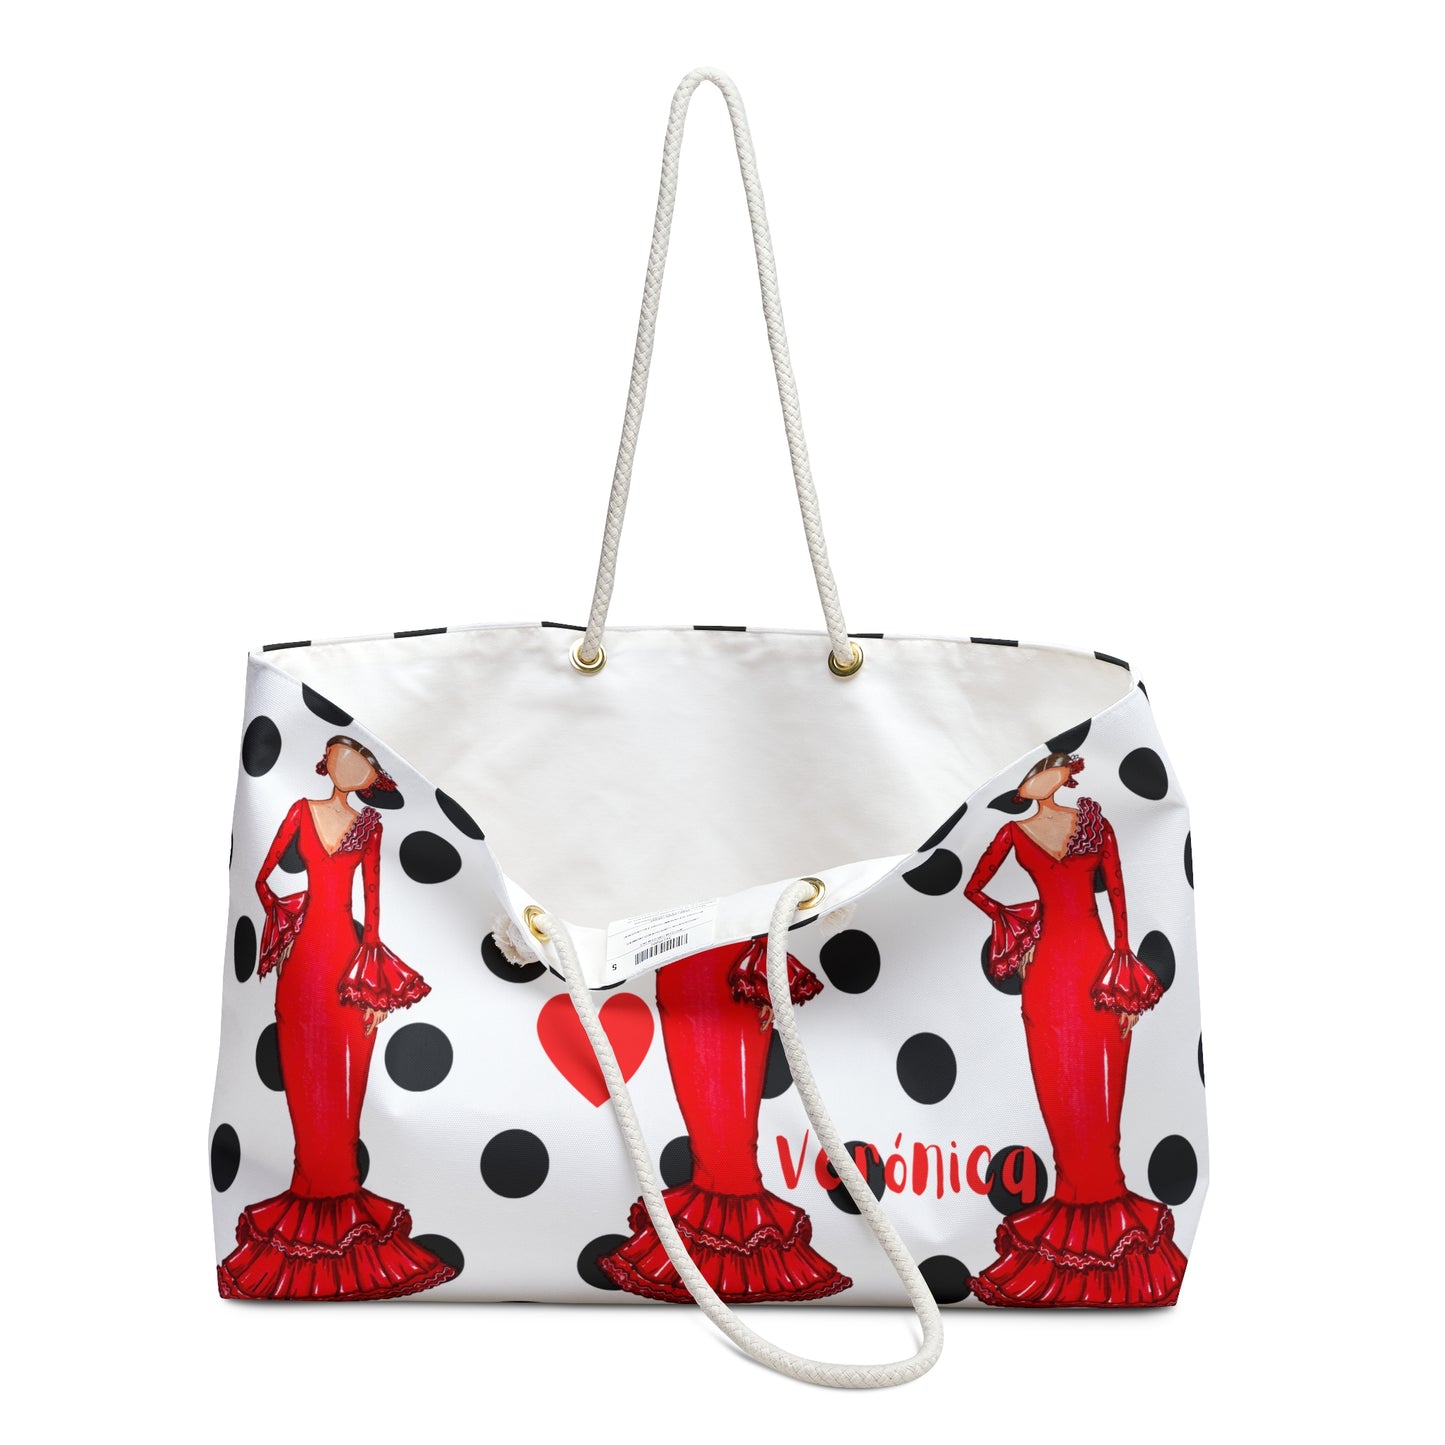 a polka dot bag with a woman in a red dress on it